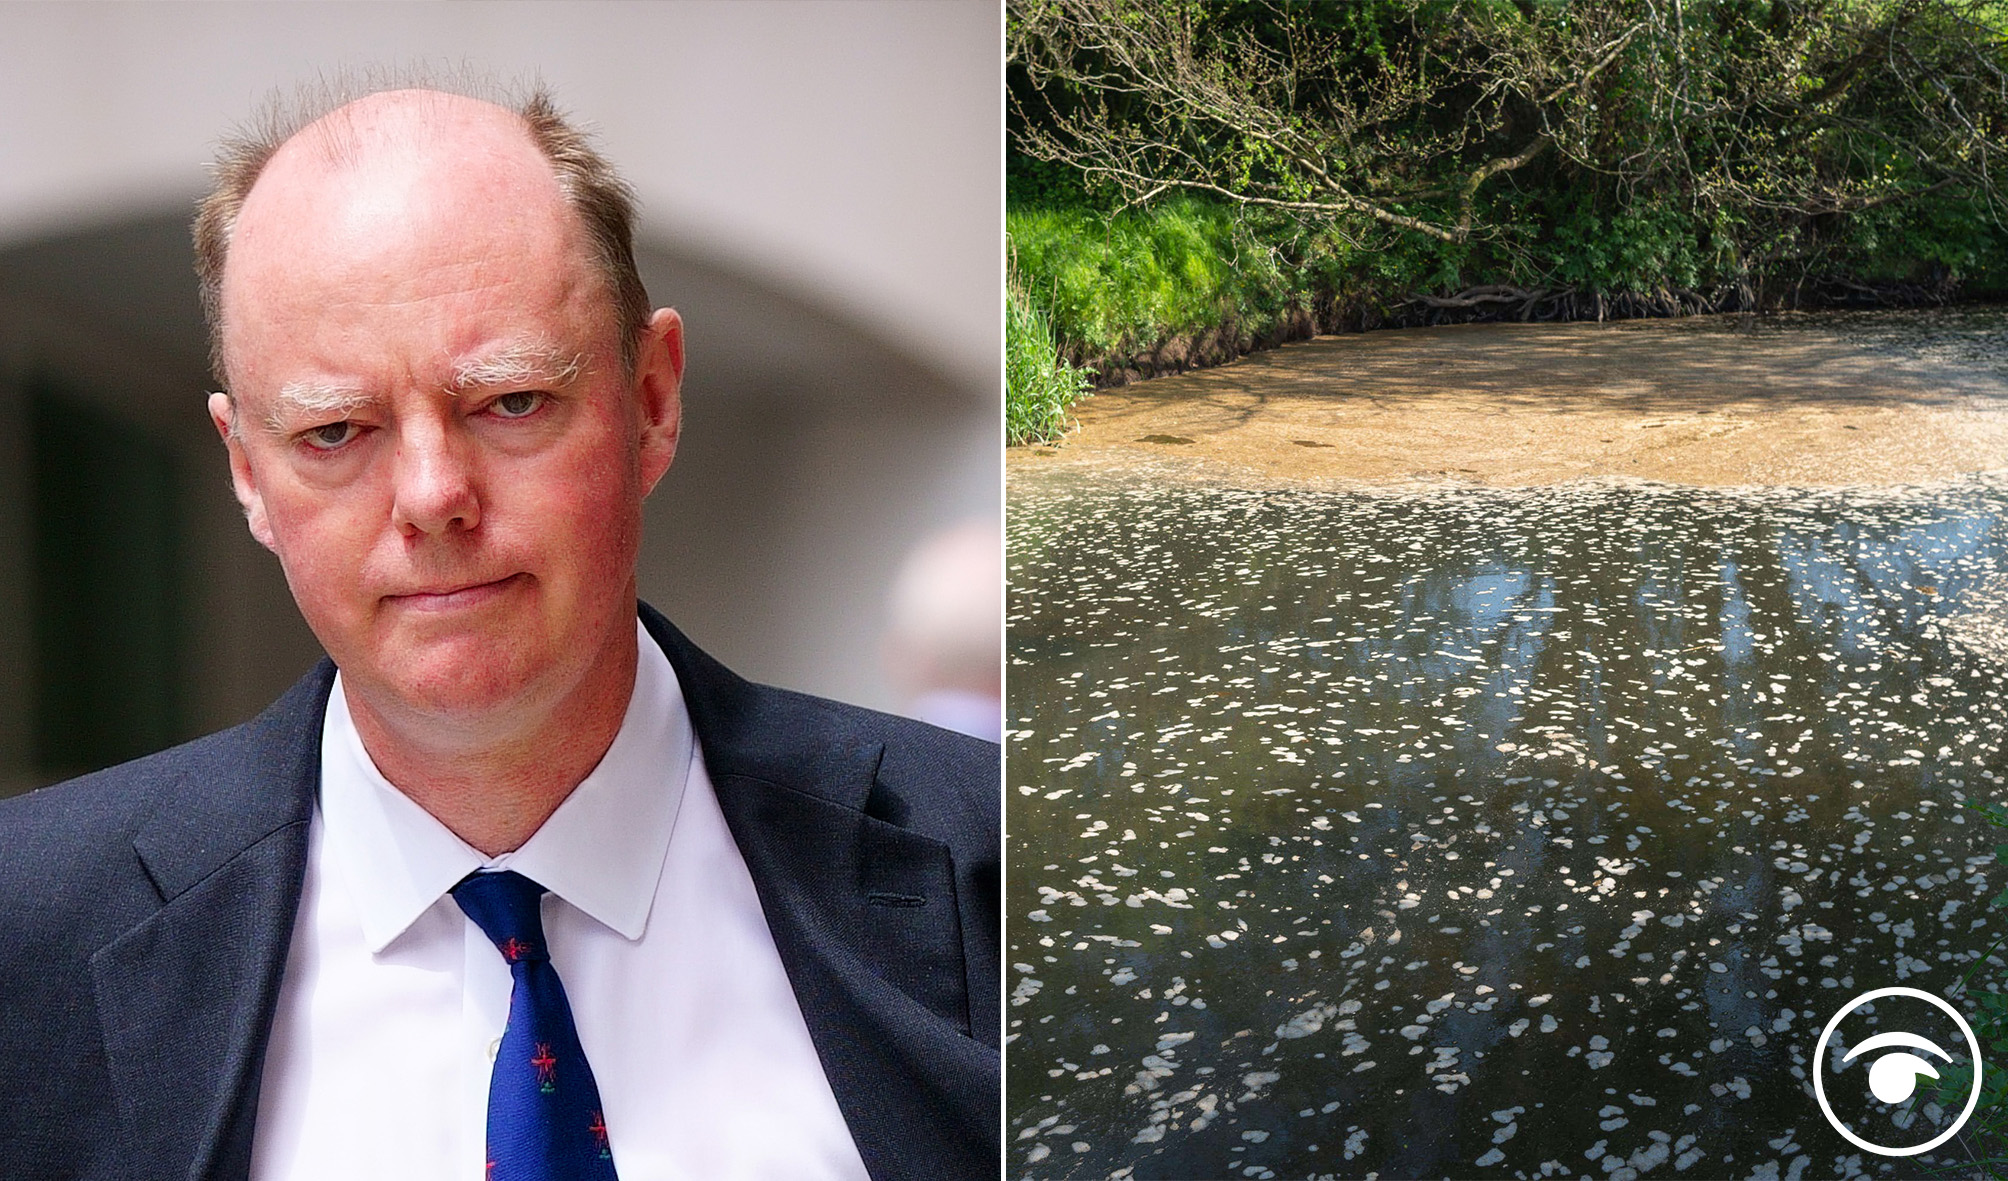 ‘Human faeces’ in rivers: Fury as another water supplier probed over sewage treatment as Whitty wades into crisis